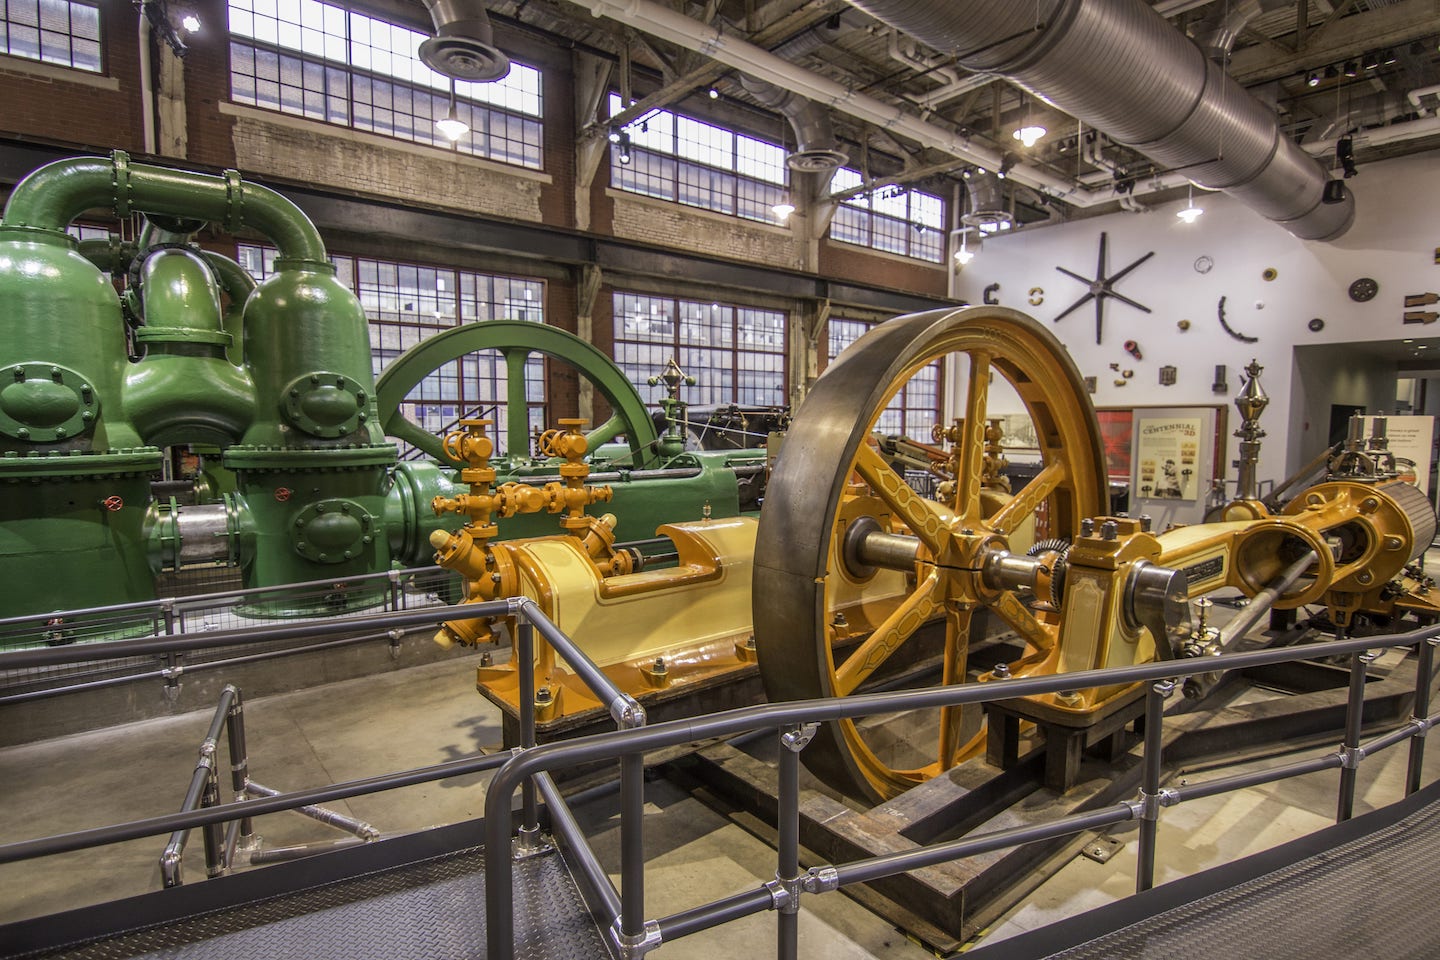 National Museum of Industrial History